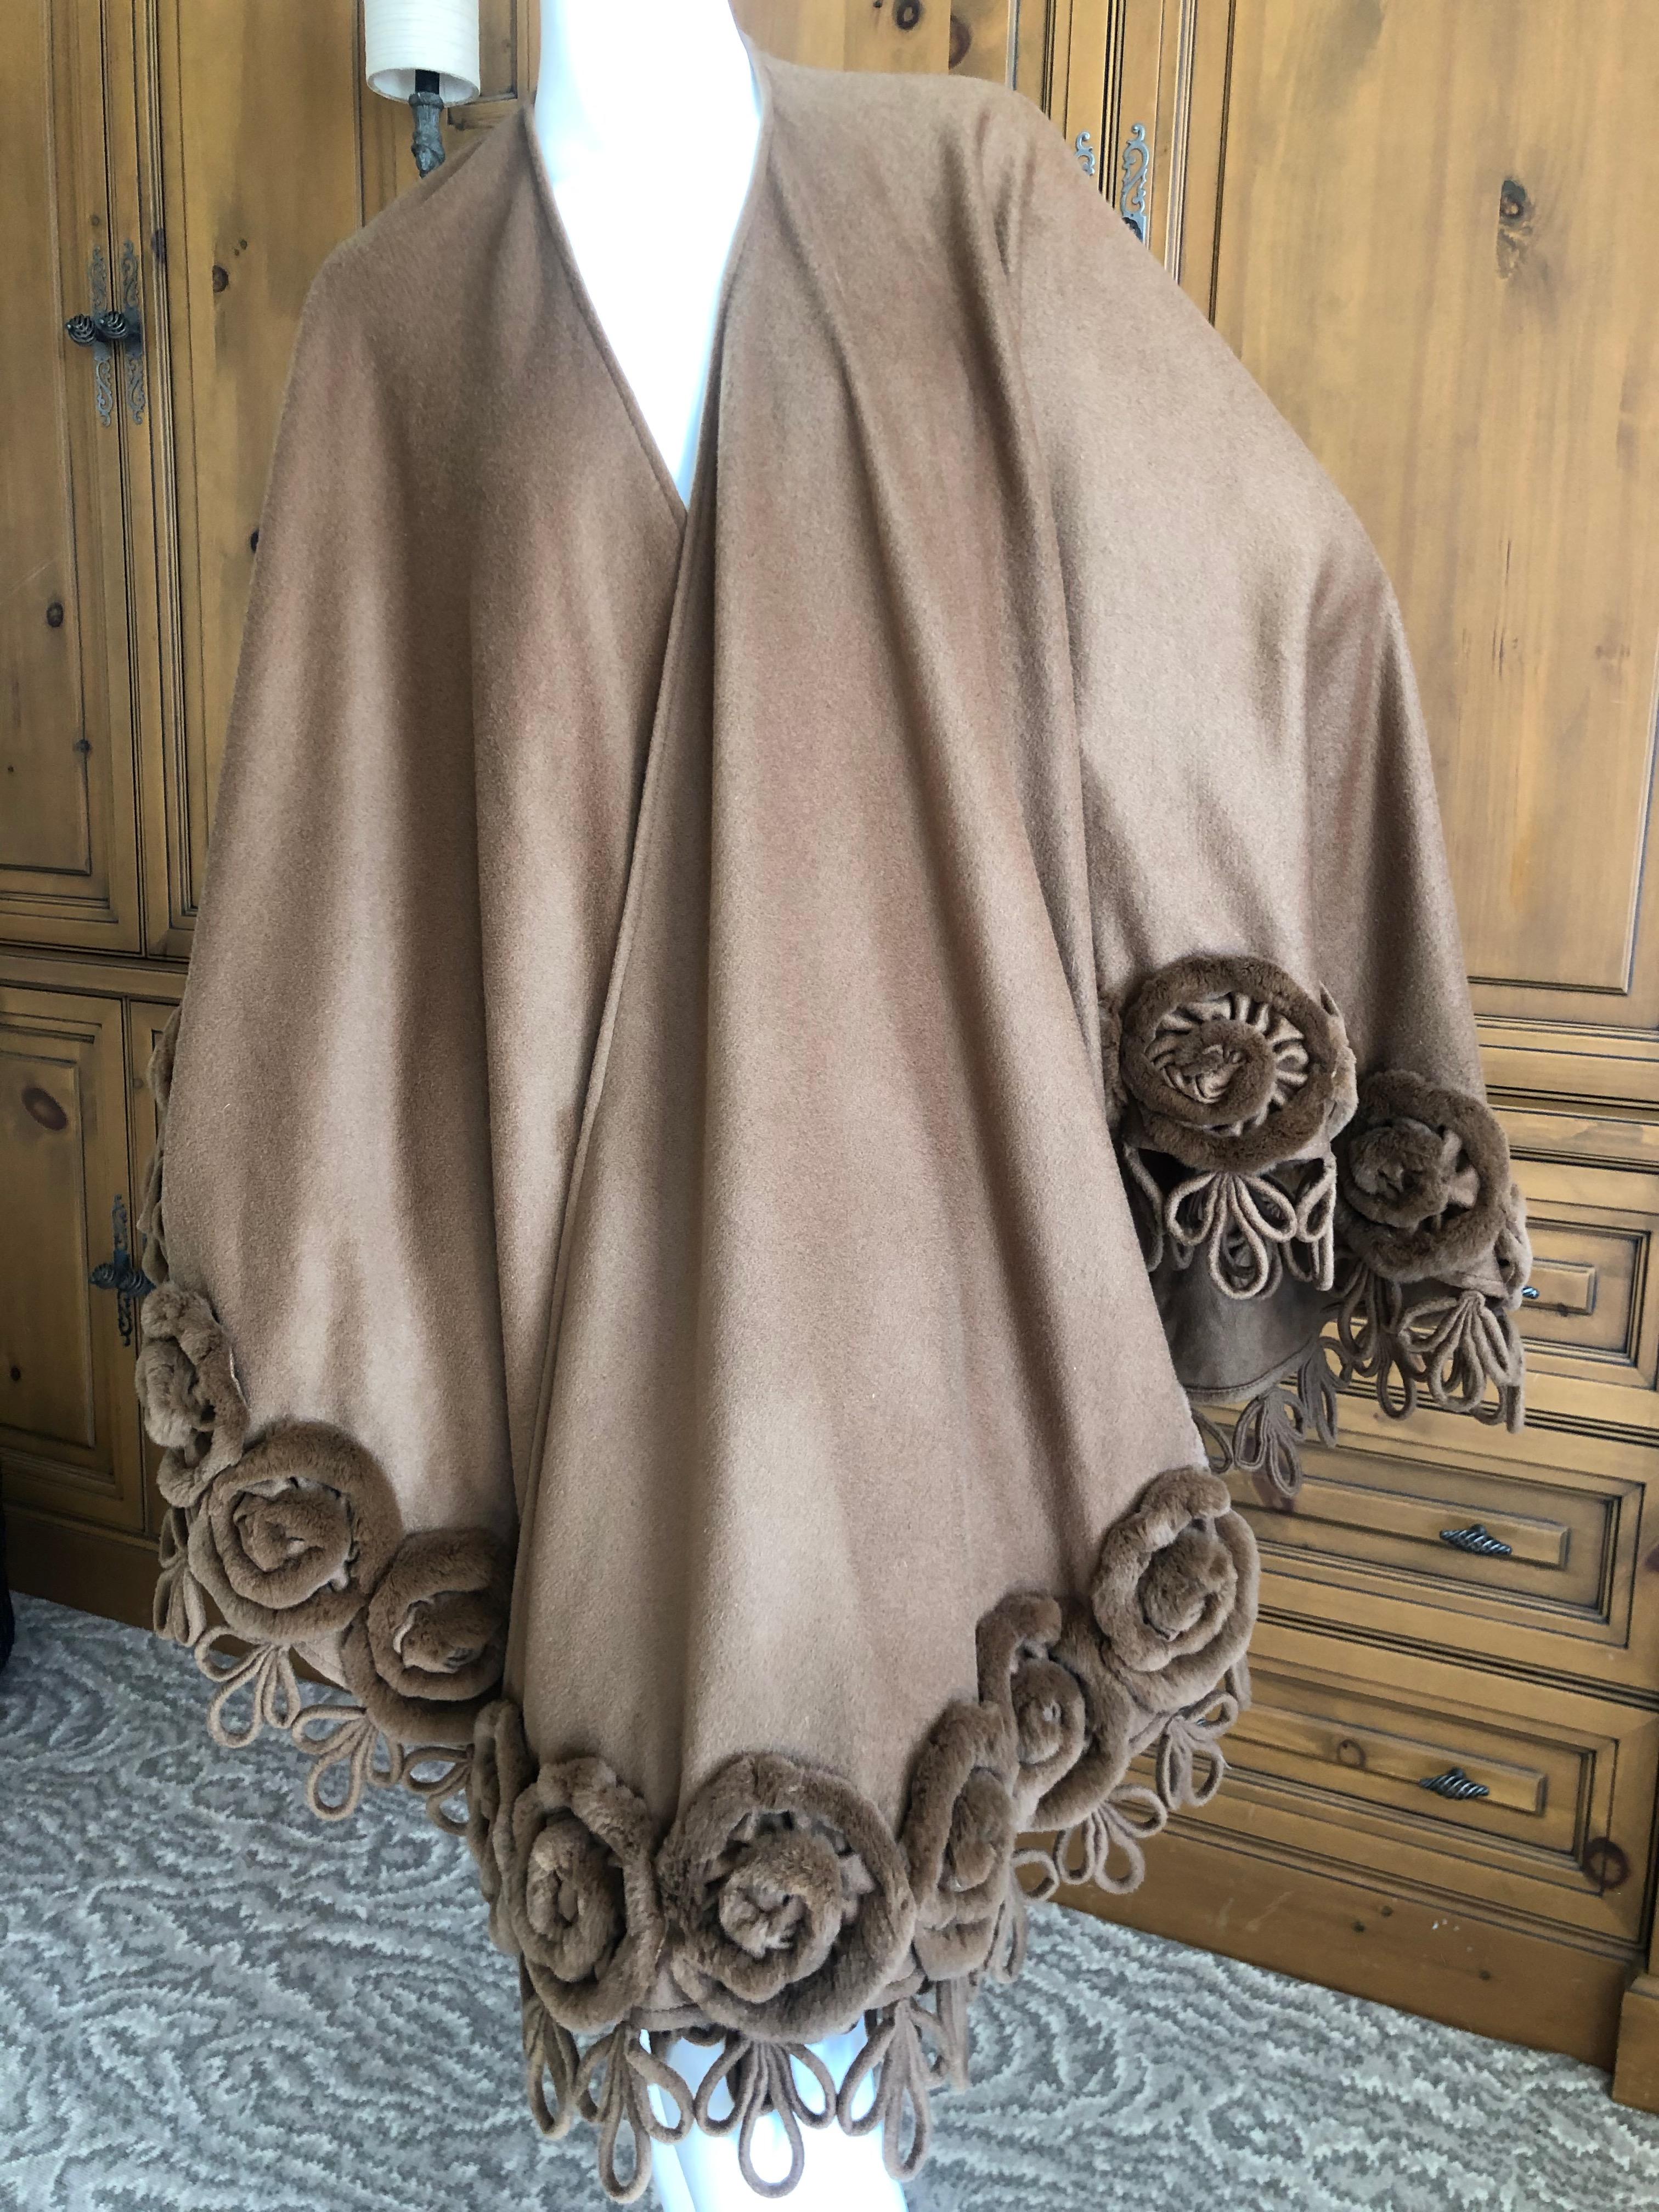 Vintage Chinchilla Trim Cashmere Vicuna Shawl Edwards Lowell Beverly Hills.
According to the estate this is Vicuna, but there is no fabric label.
The trim is chinchilla or chinchilla rex crafted into florettes.
So luxurious
35